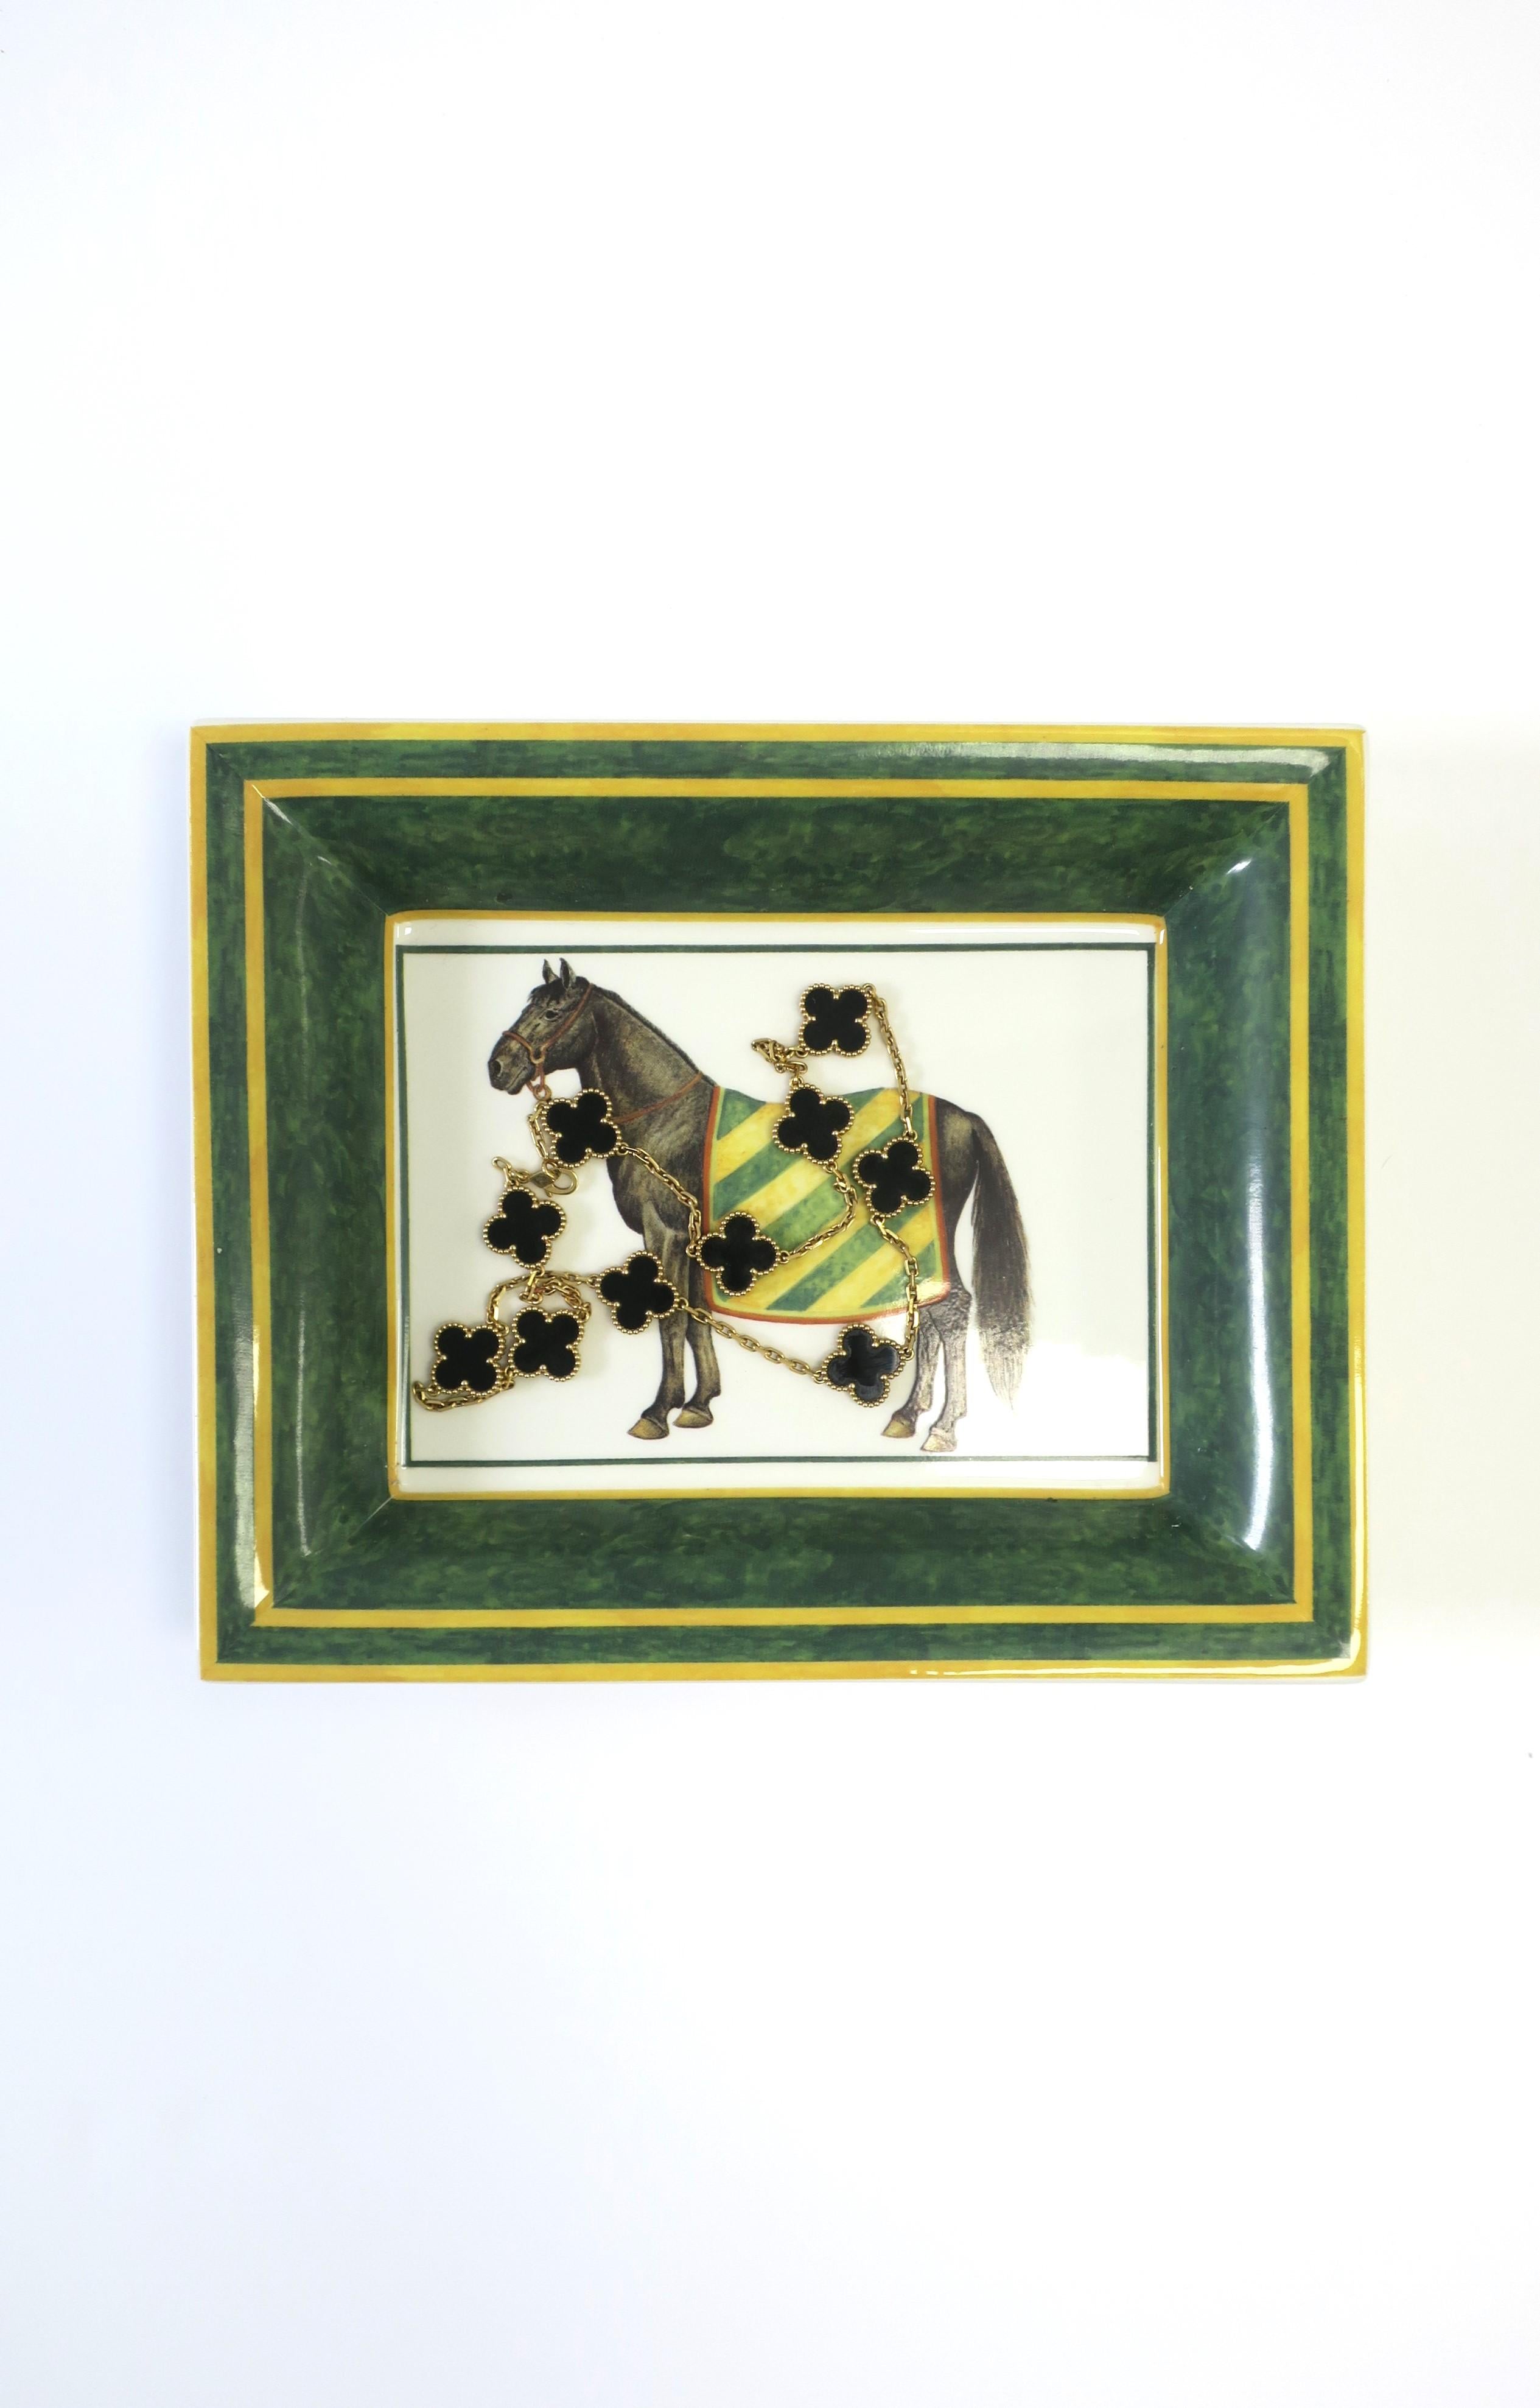 Italian Porcelain Jewelry Tray Dish Vide-Poche Catchall with Horse Design In Good Condition For Sale In New York, NY